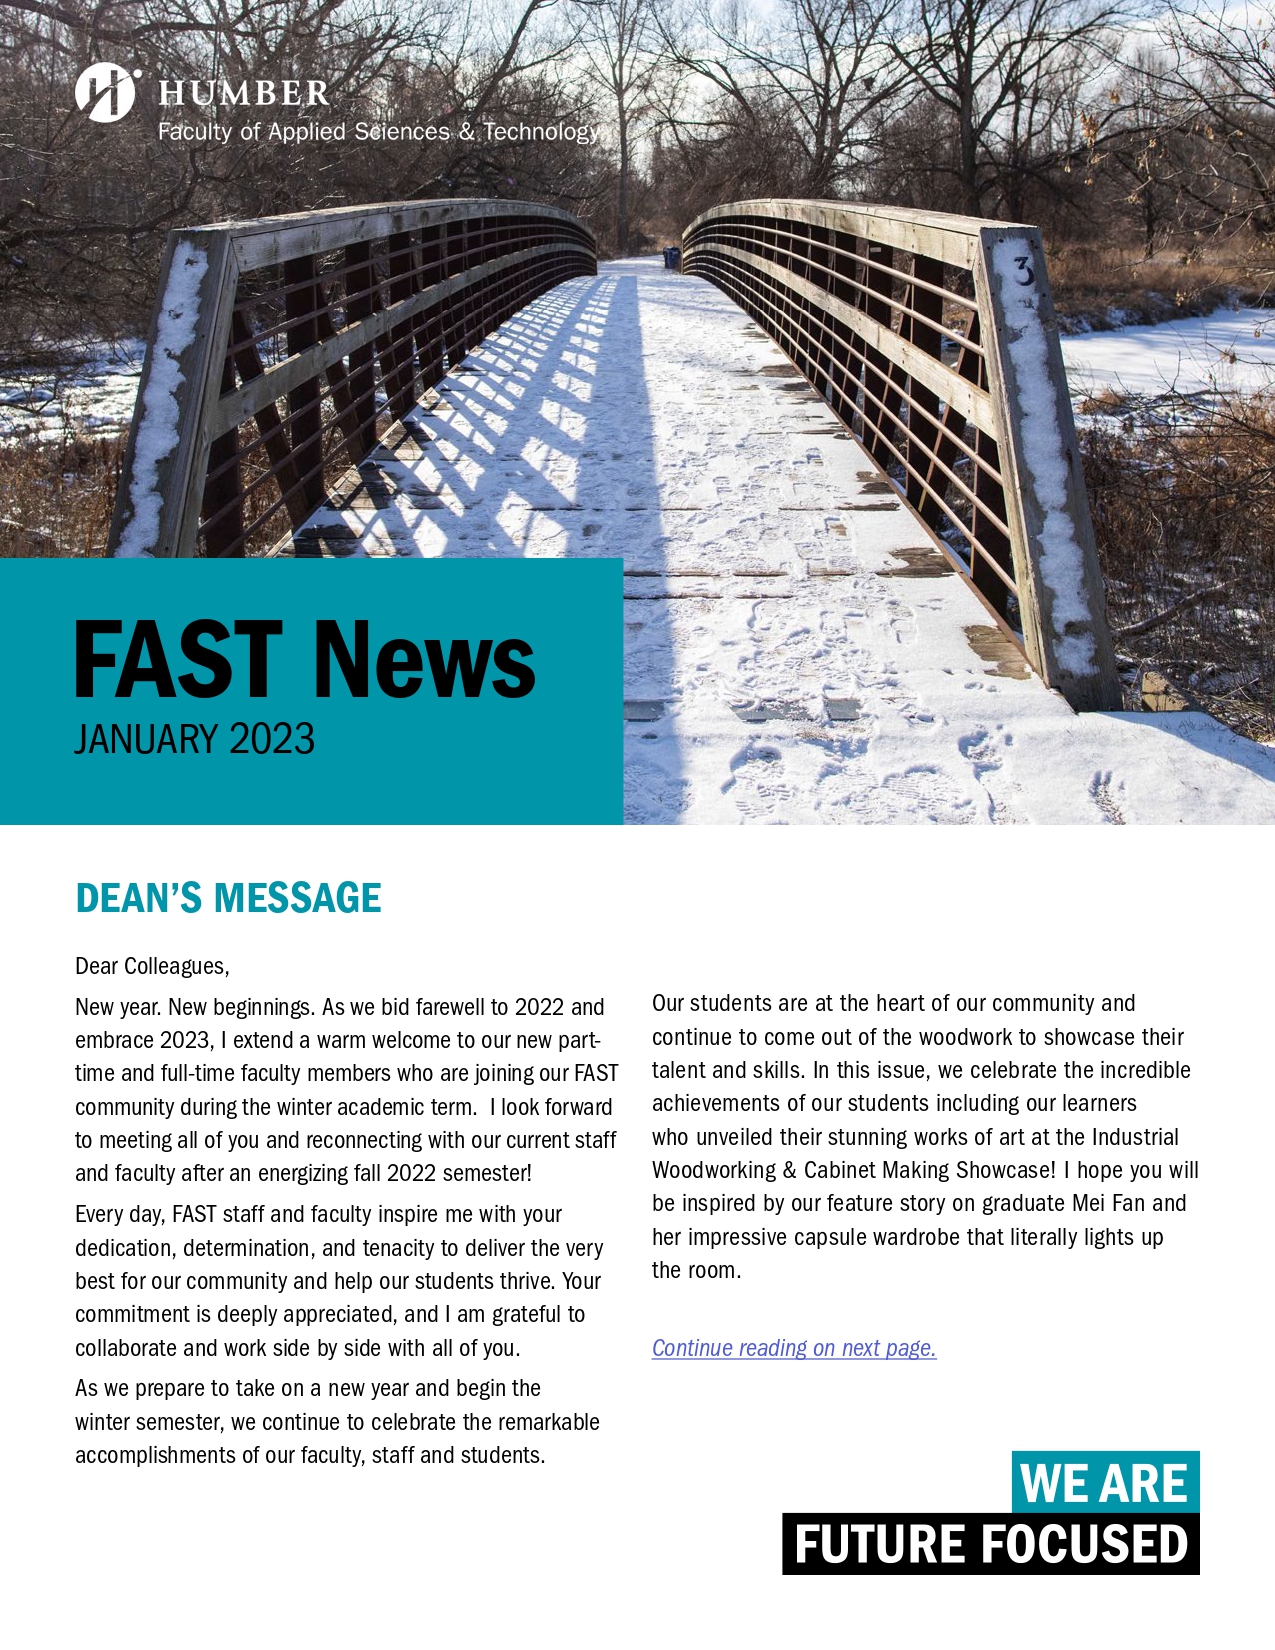 Front cover of the FAST newsletter January 2023 issue